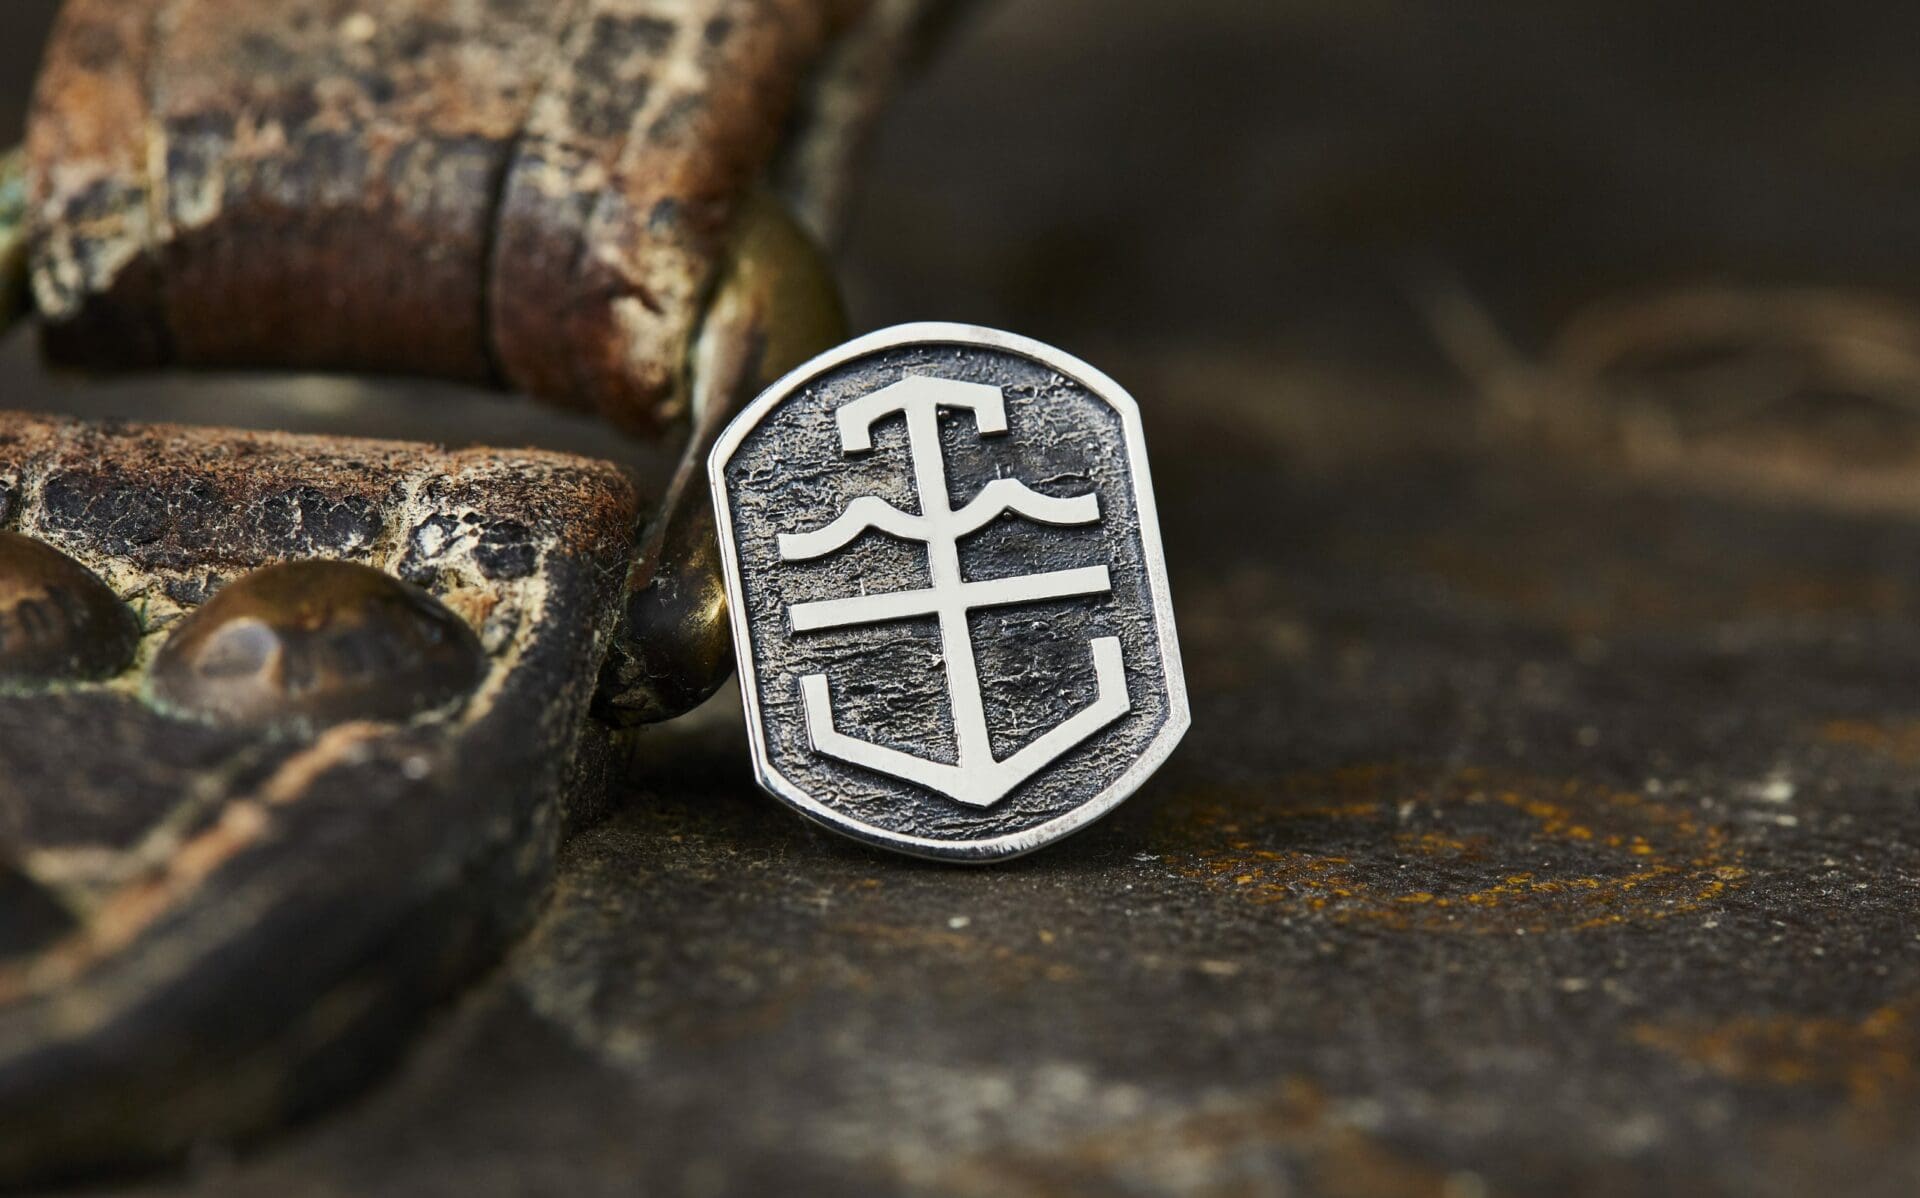 Win a Time+Tide lapel pin by telling us your favourites watches